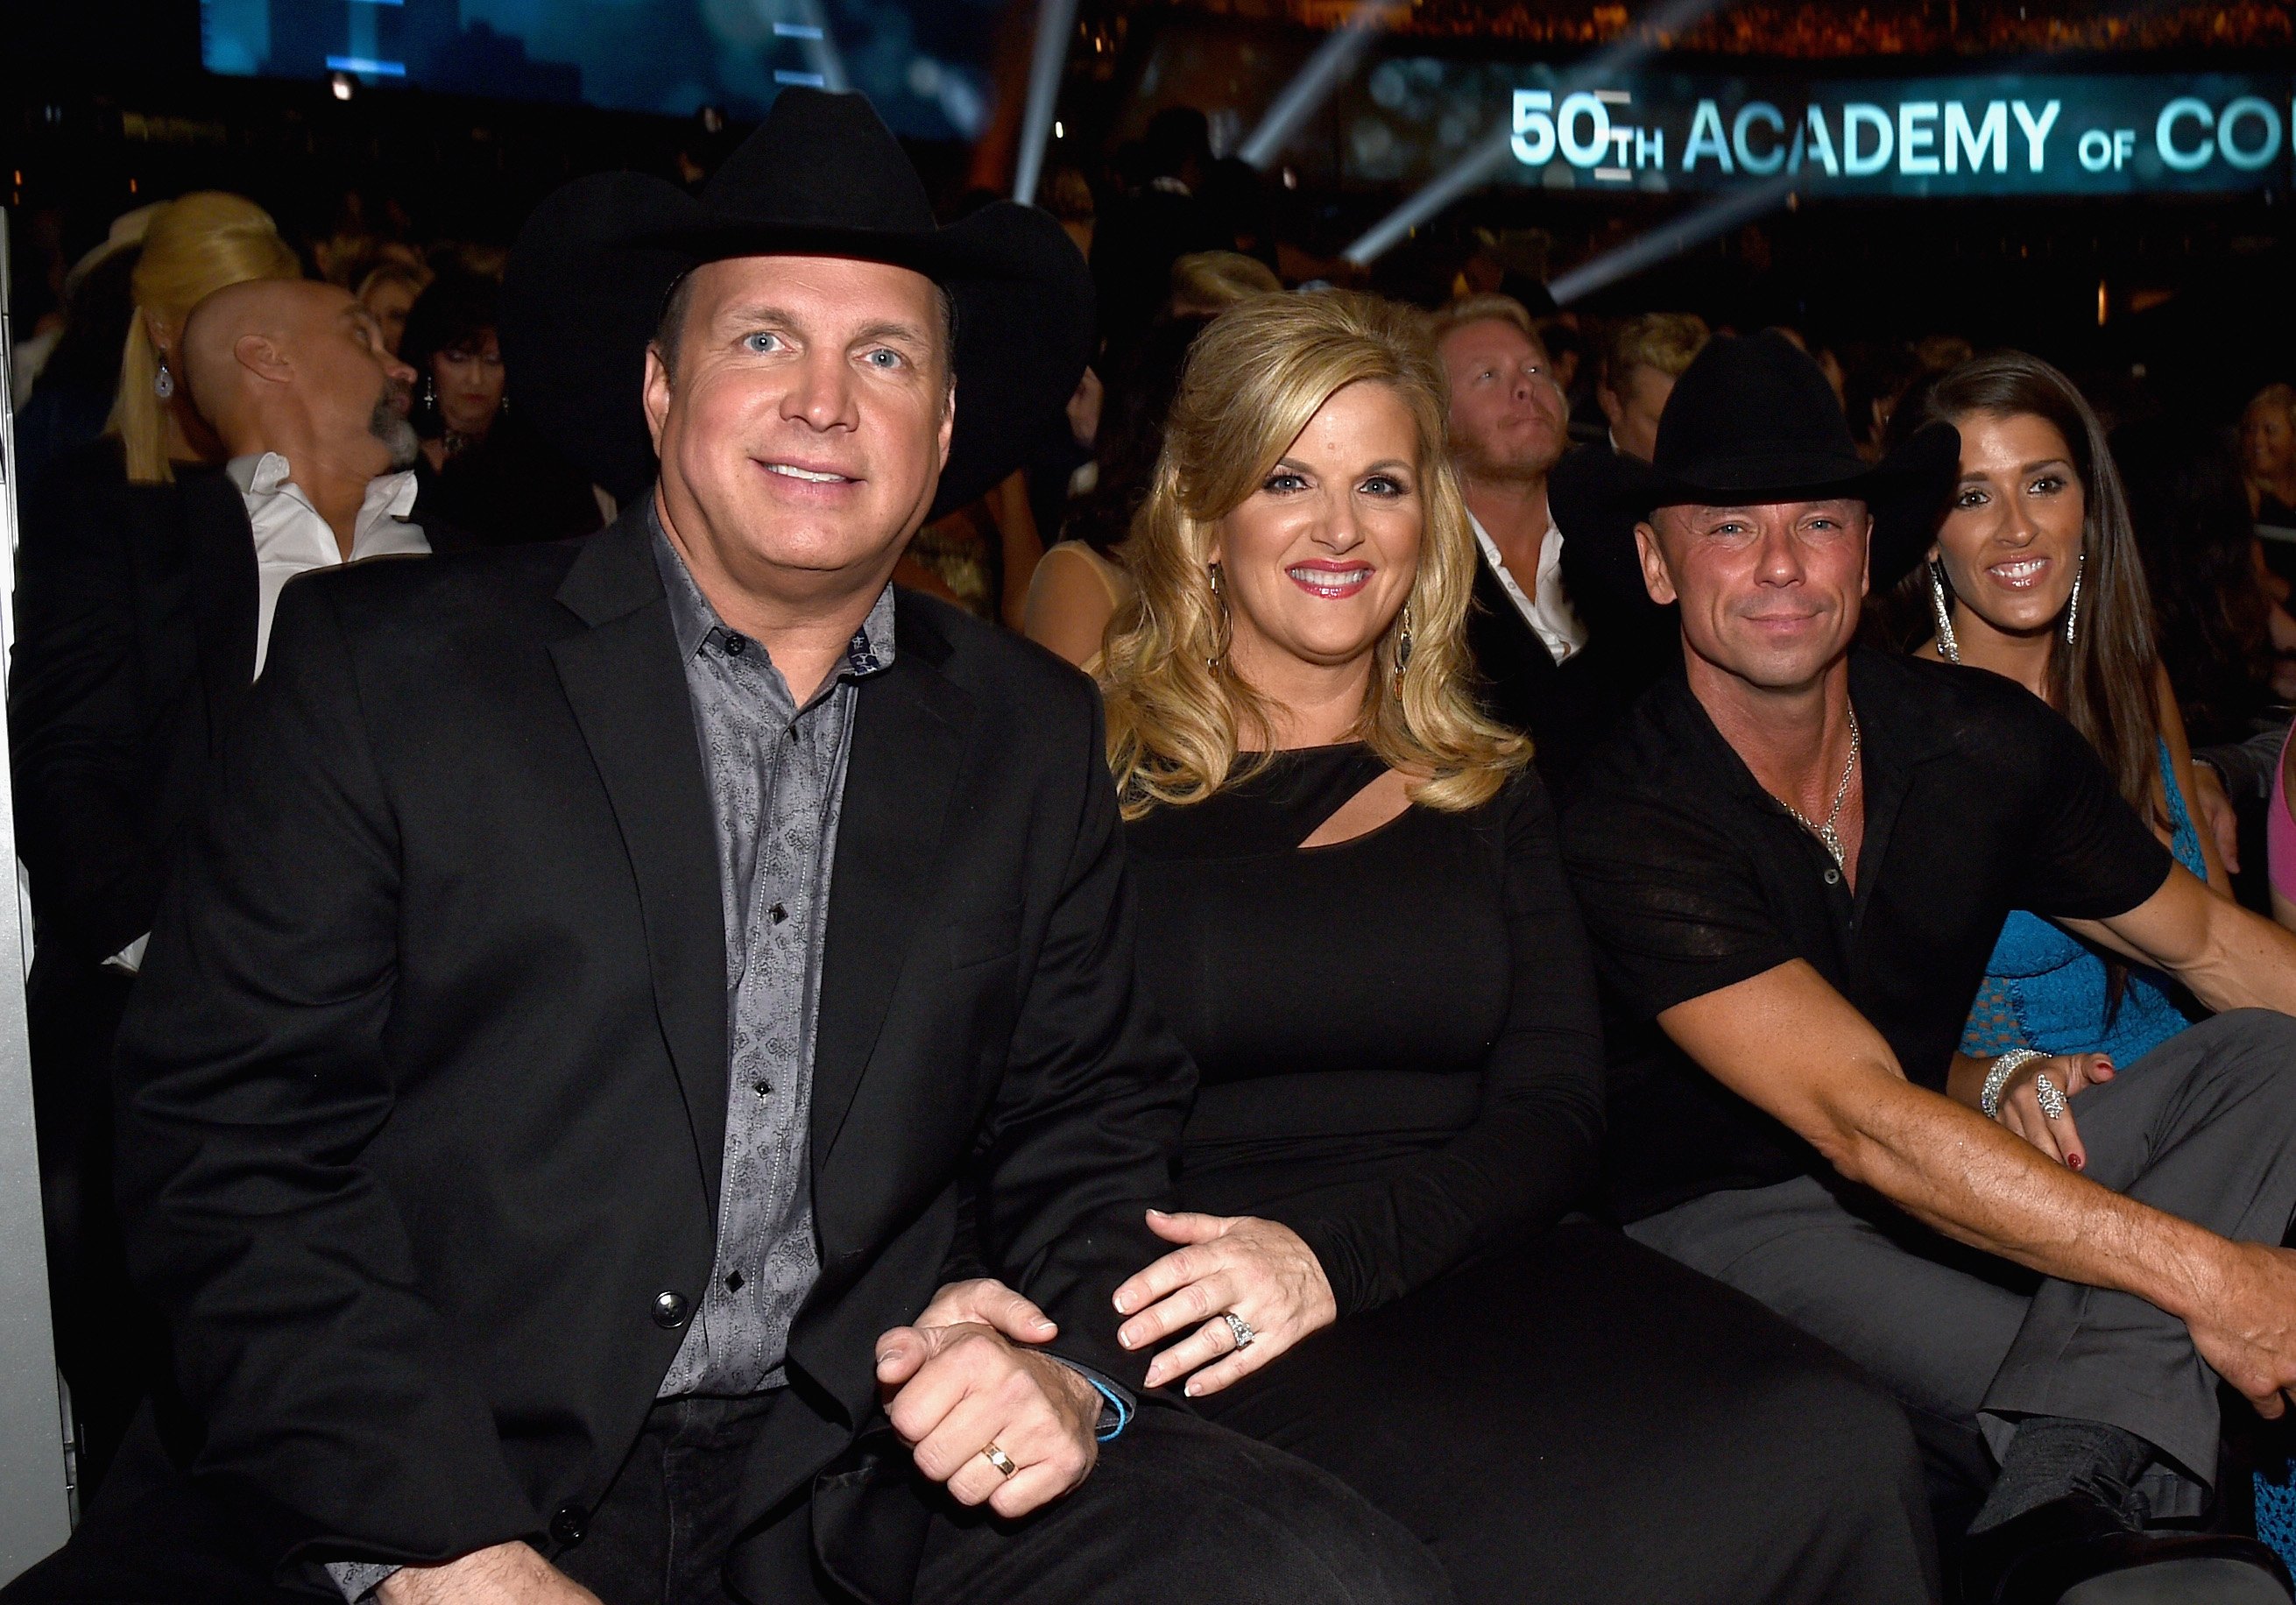 (L-R) Musical artists Garth Brooks, Trisha Yearwood, Kenny Chesney and Mary Nolan during the 50th Academy of Country Music Awards at AT&T Stadium on April 19, 2015, in Arlington, Texas. | Source: Getty Images 